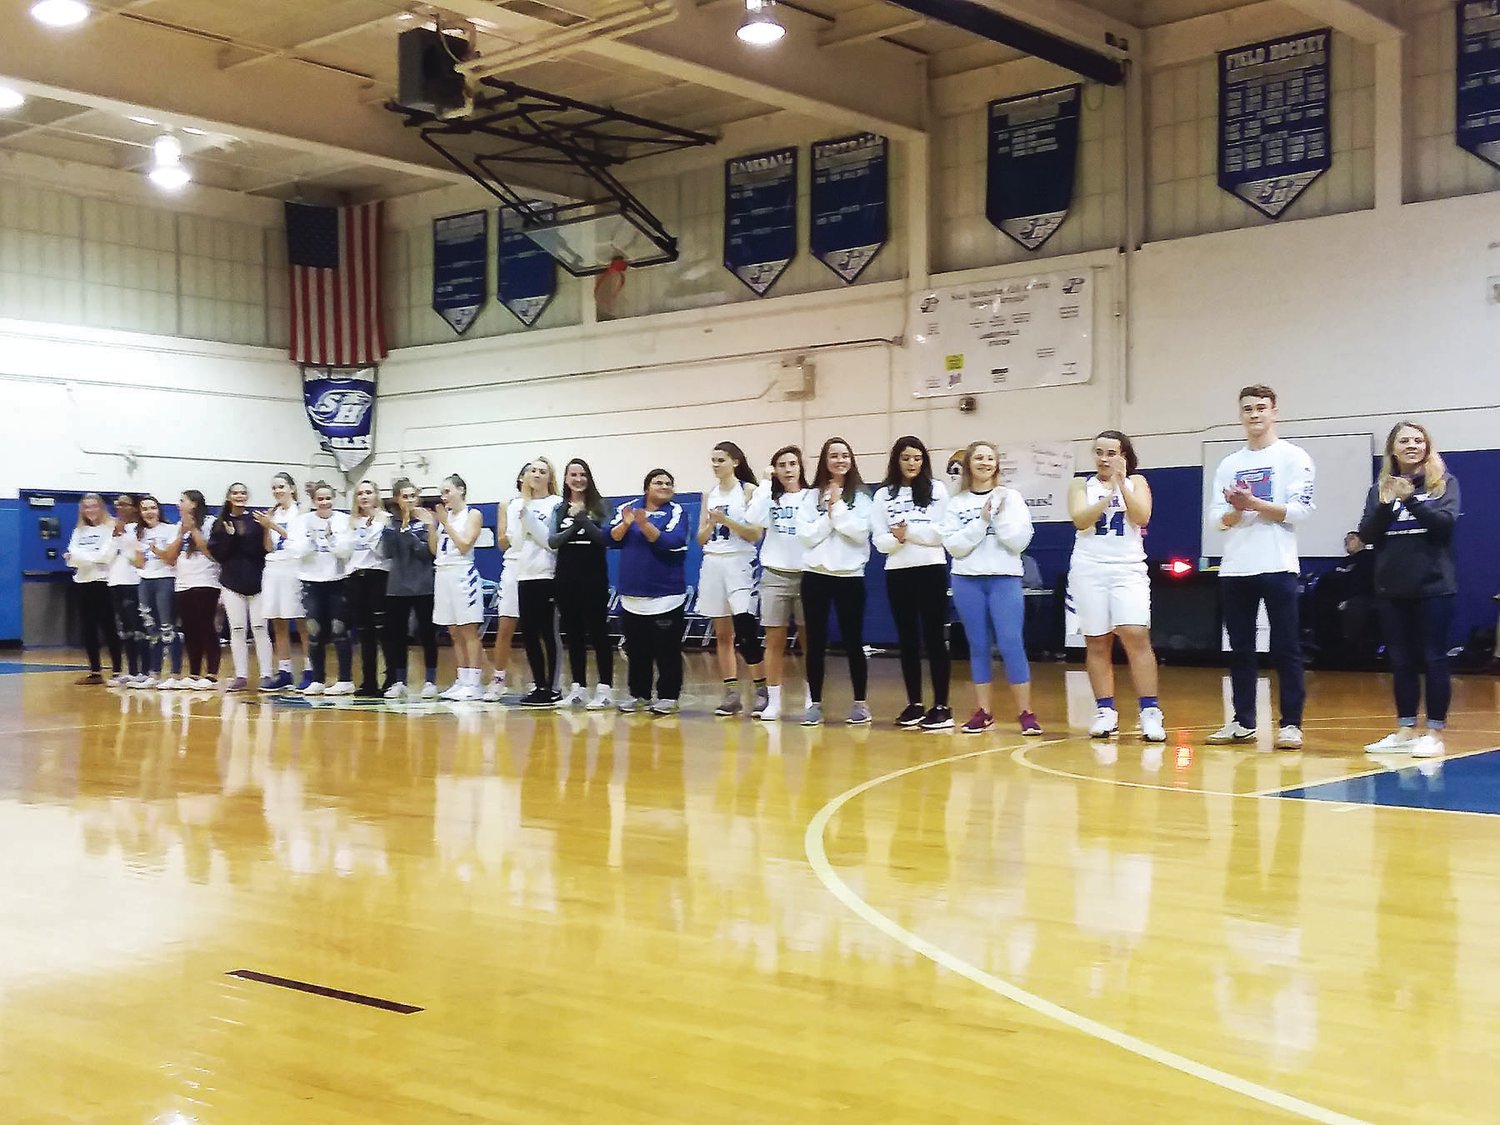 South Hunterdon diver Lance Christopher and the 2018 field hockey team were recognized during a banner ceremony on Dec. 21. Christopher, a senior, was named an All-American diver and was second in the state last year. The field hockey team went 8-5-1 (5-0-1 in conference) and won the Skyland Mountain conference title.  Photograph by Don Leypoldt.